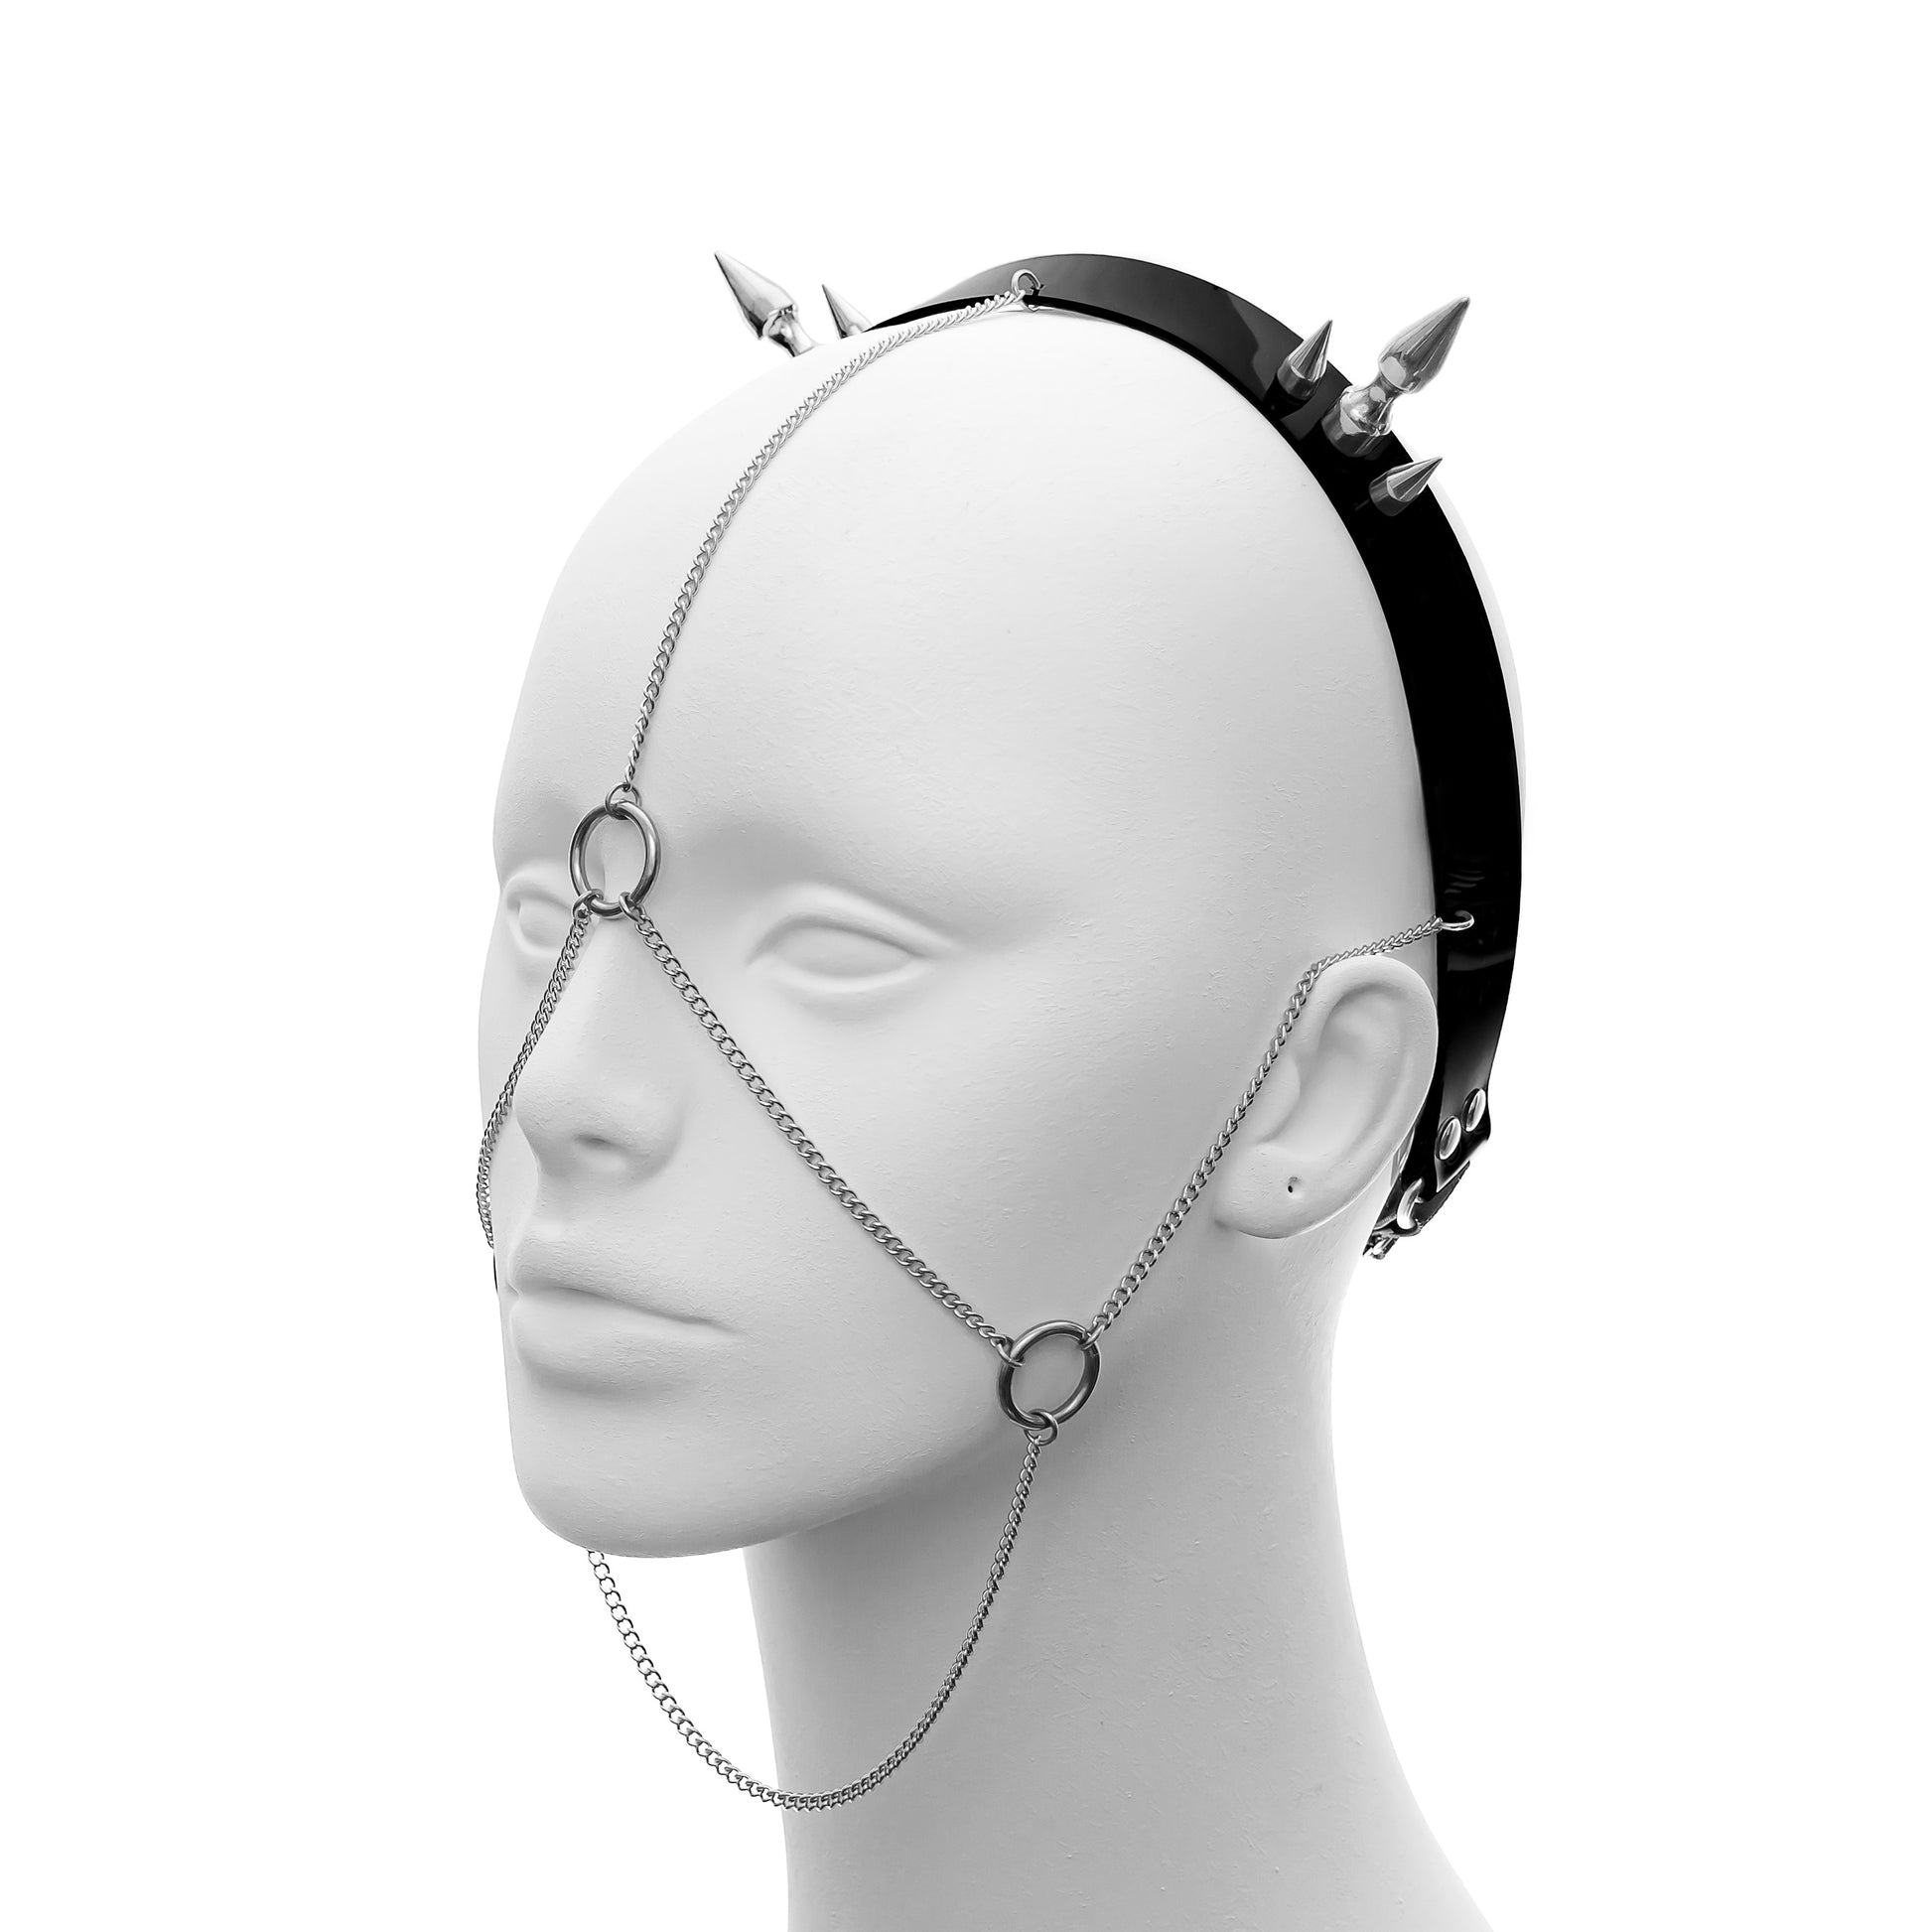 Cyberpunk head harness with face chain harness front and spike horns headband.